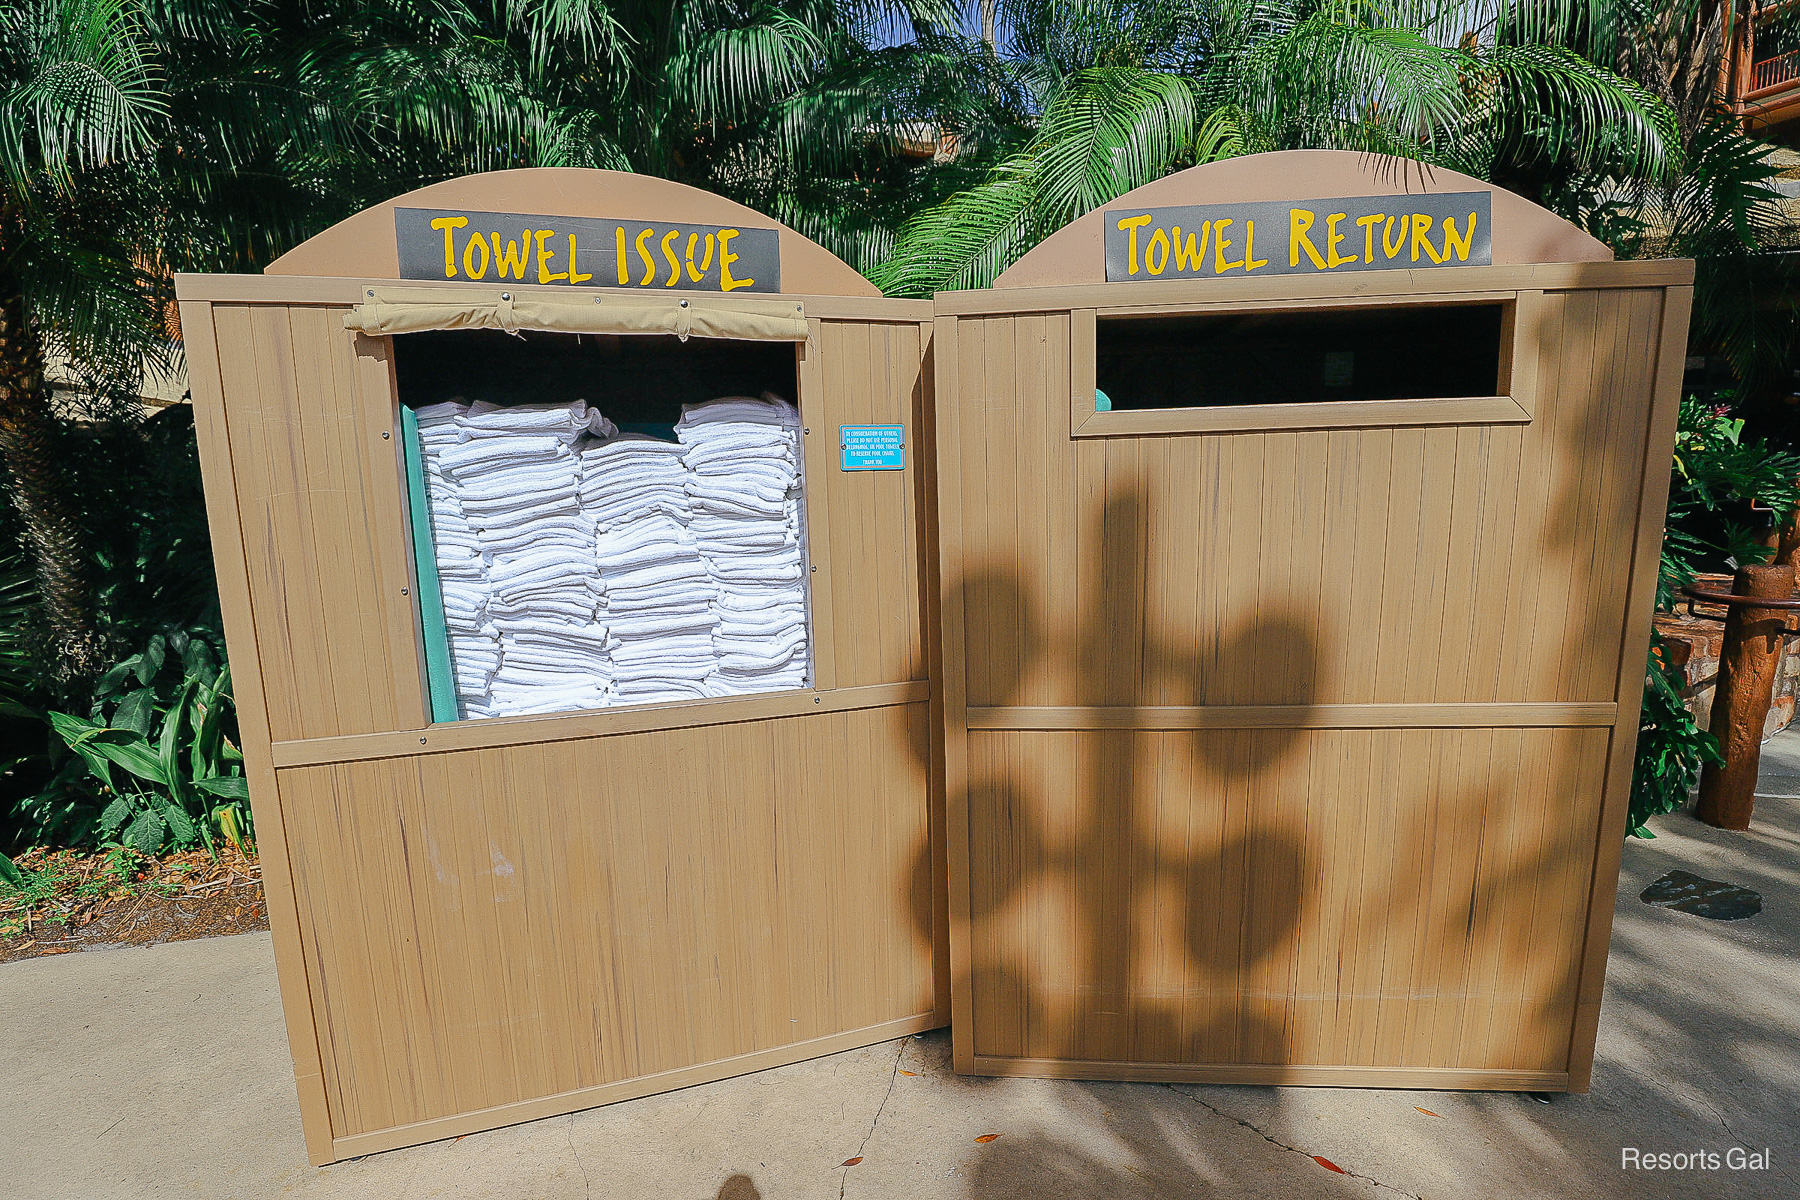 a towel bin with clean fresh towels next to a towel return bin for used towels 